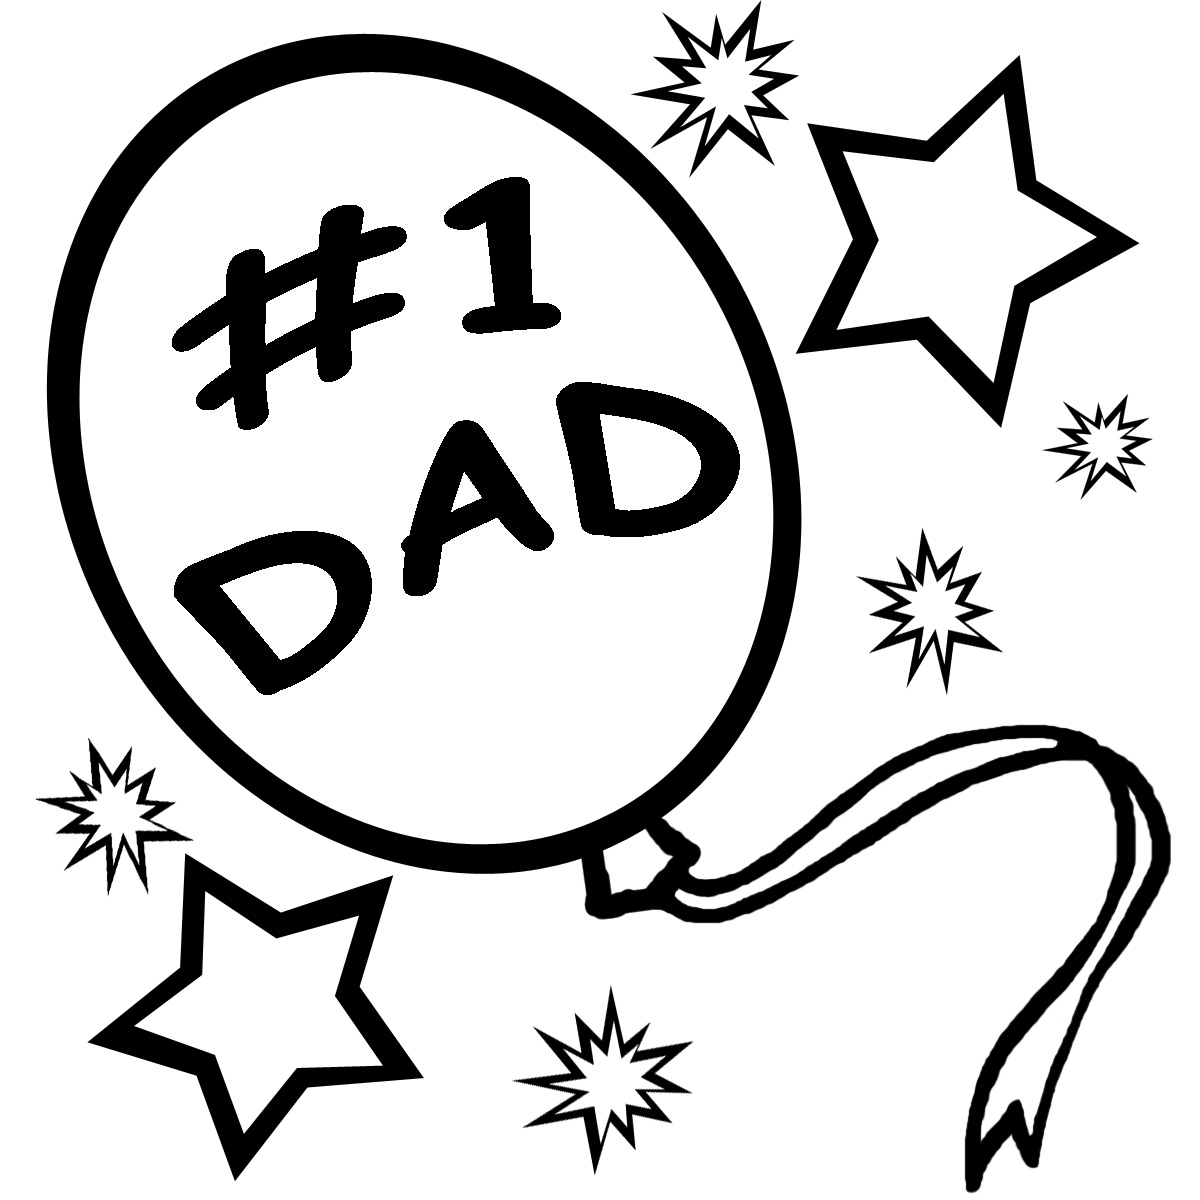 Fathers day clip art kids father image 